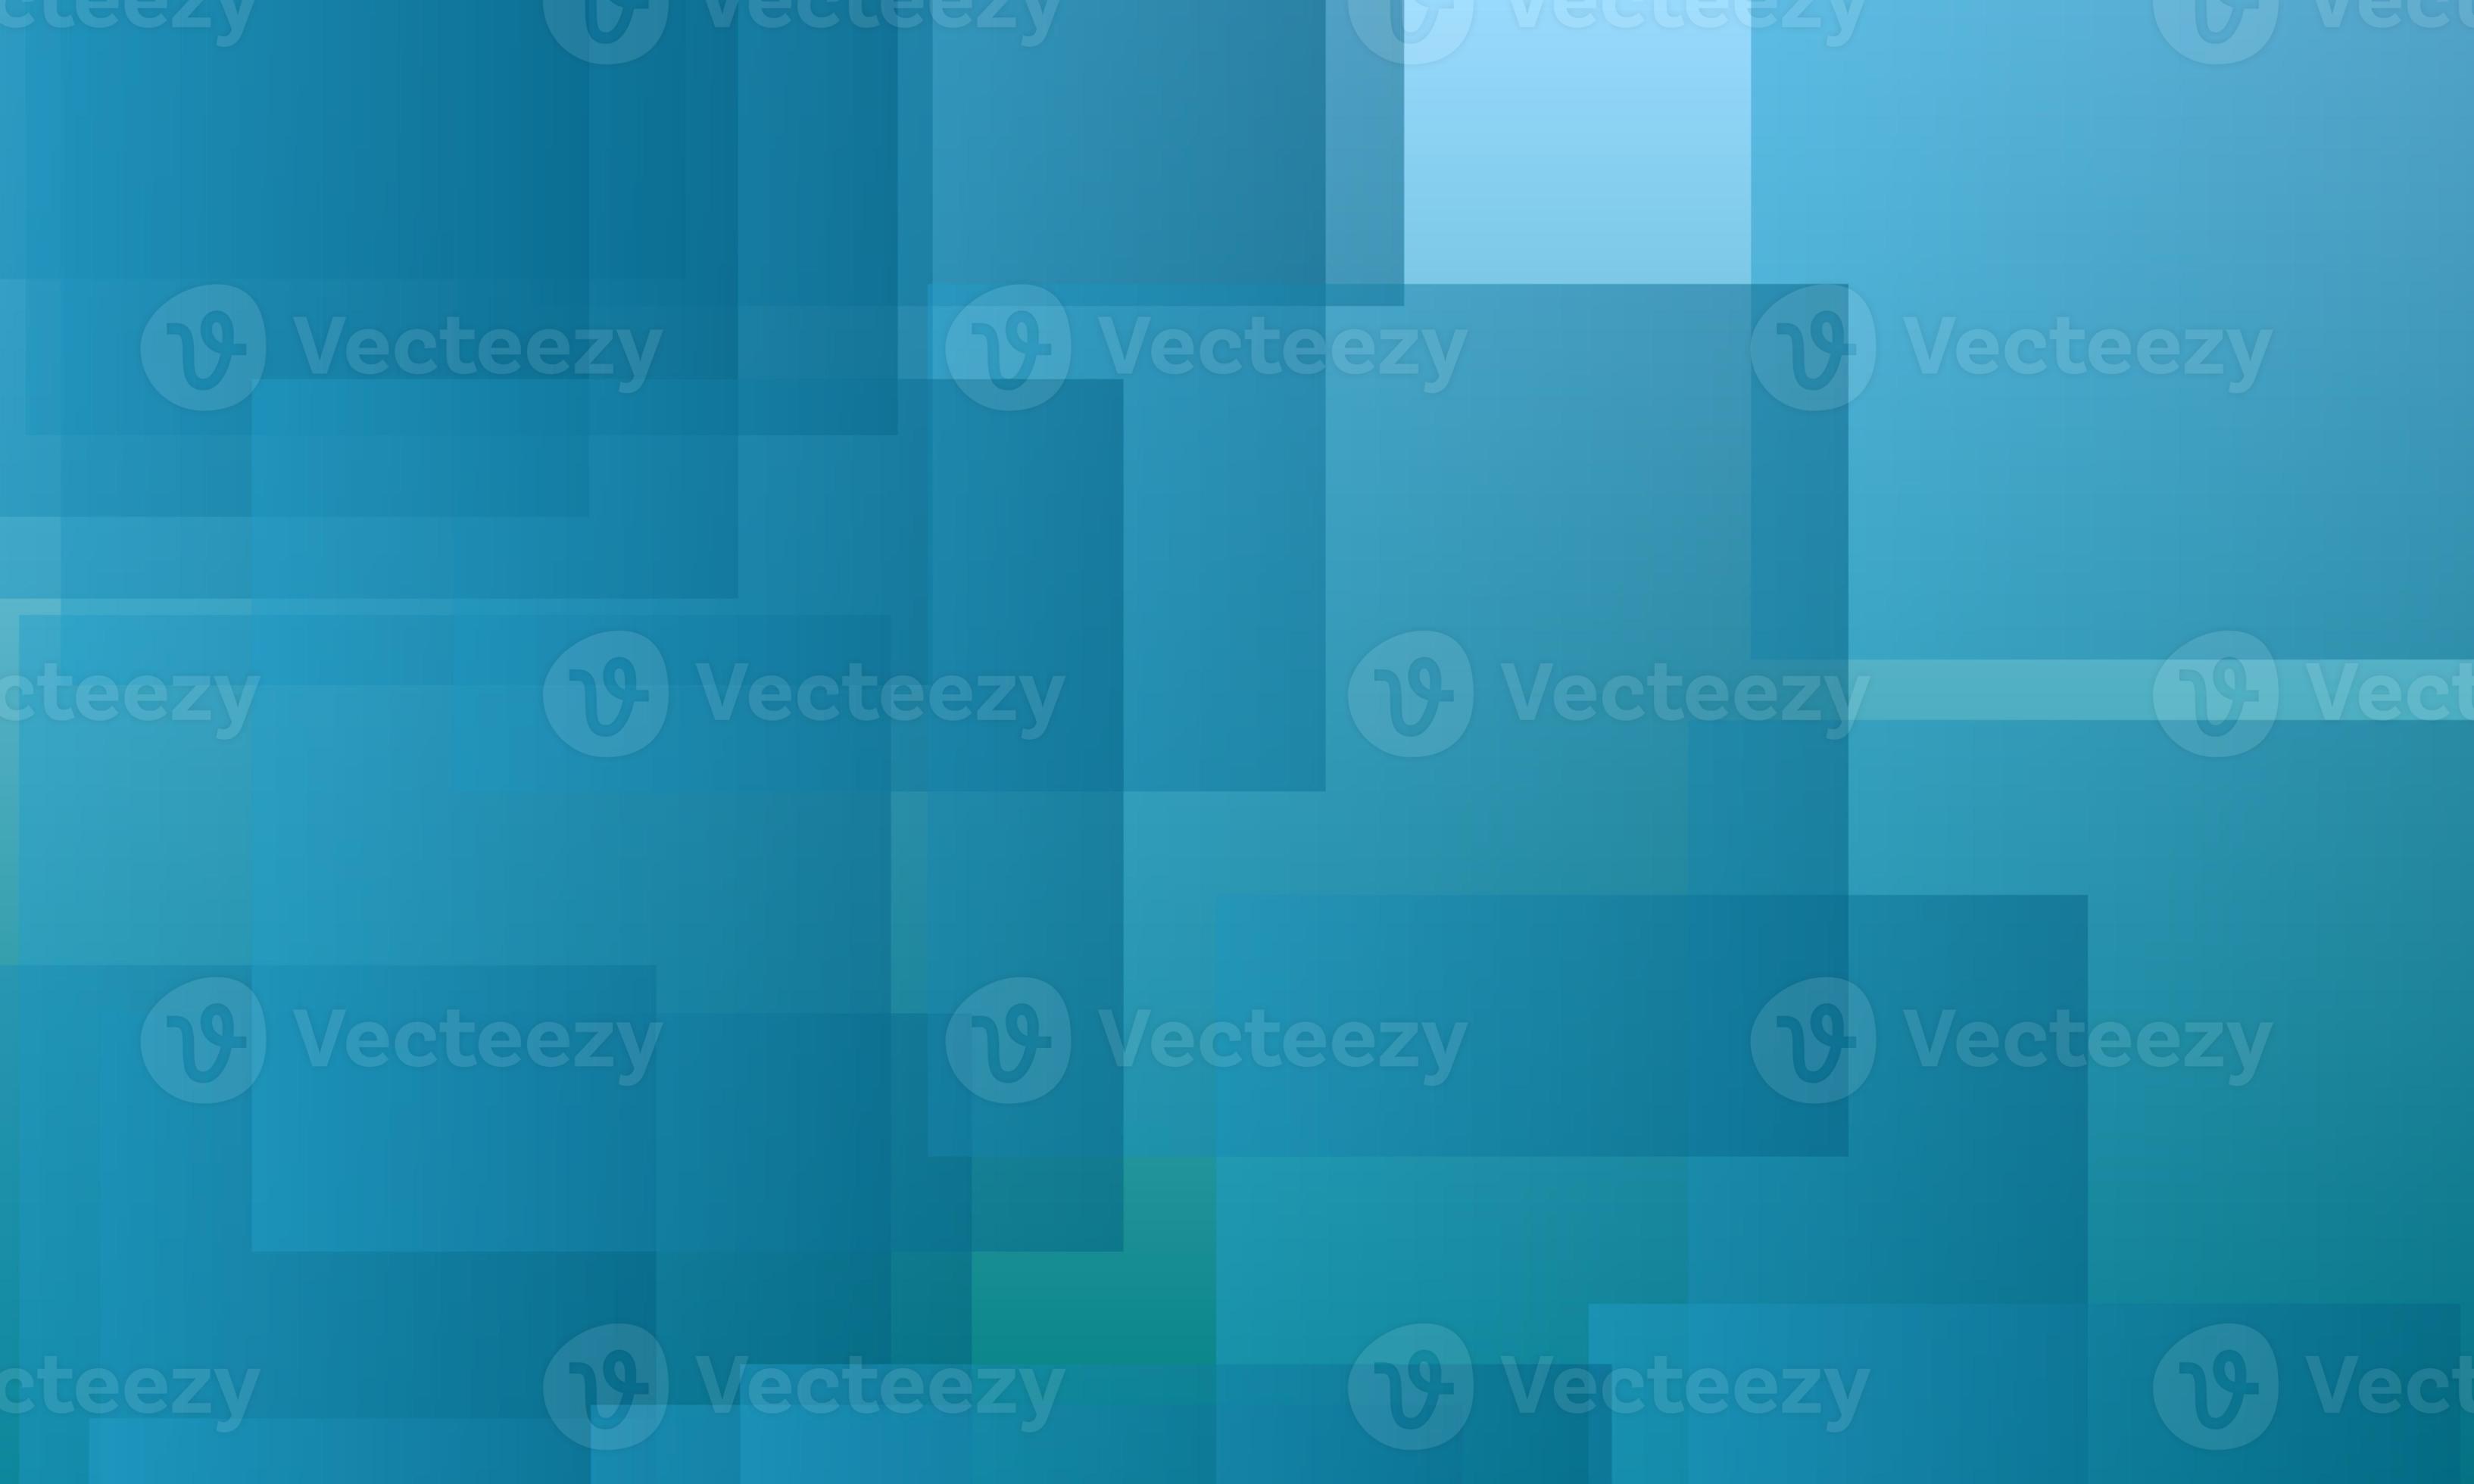 A blue and green abstract background - Aqua